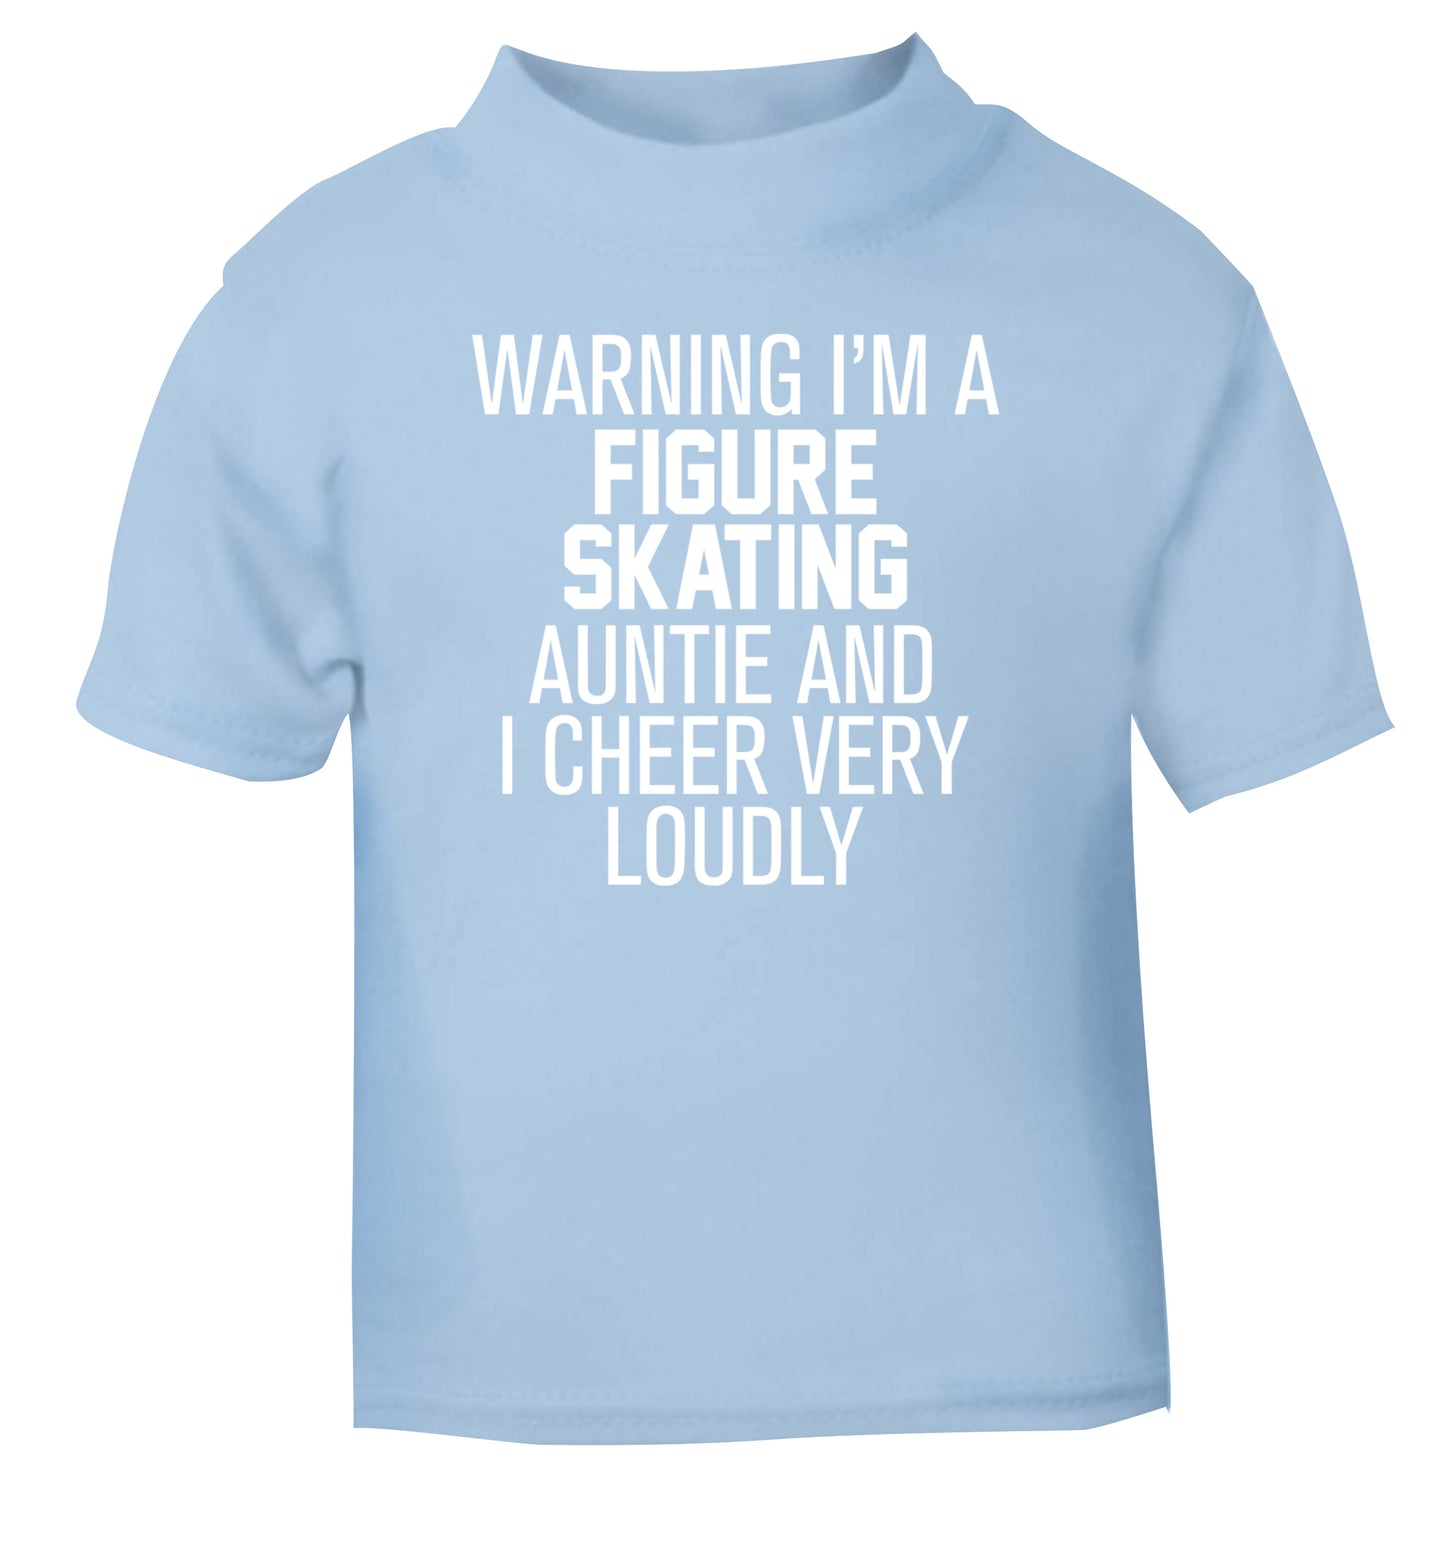 Warning I'm a figure skating auntie and I cheer very loudly light blue Baby Toddler Tshirt 2 Years